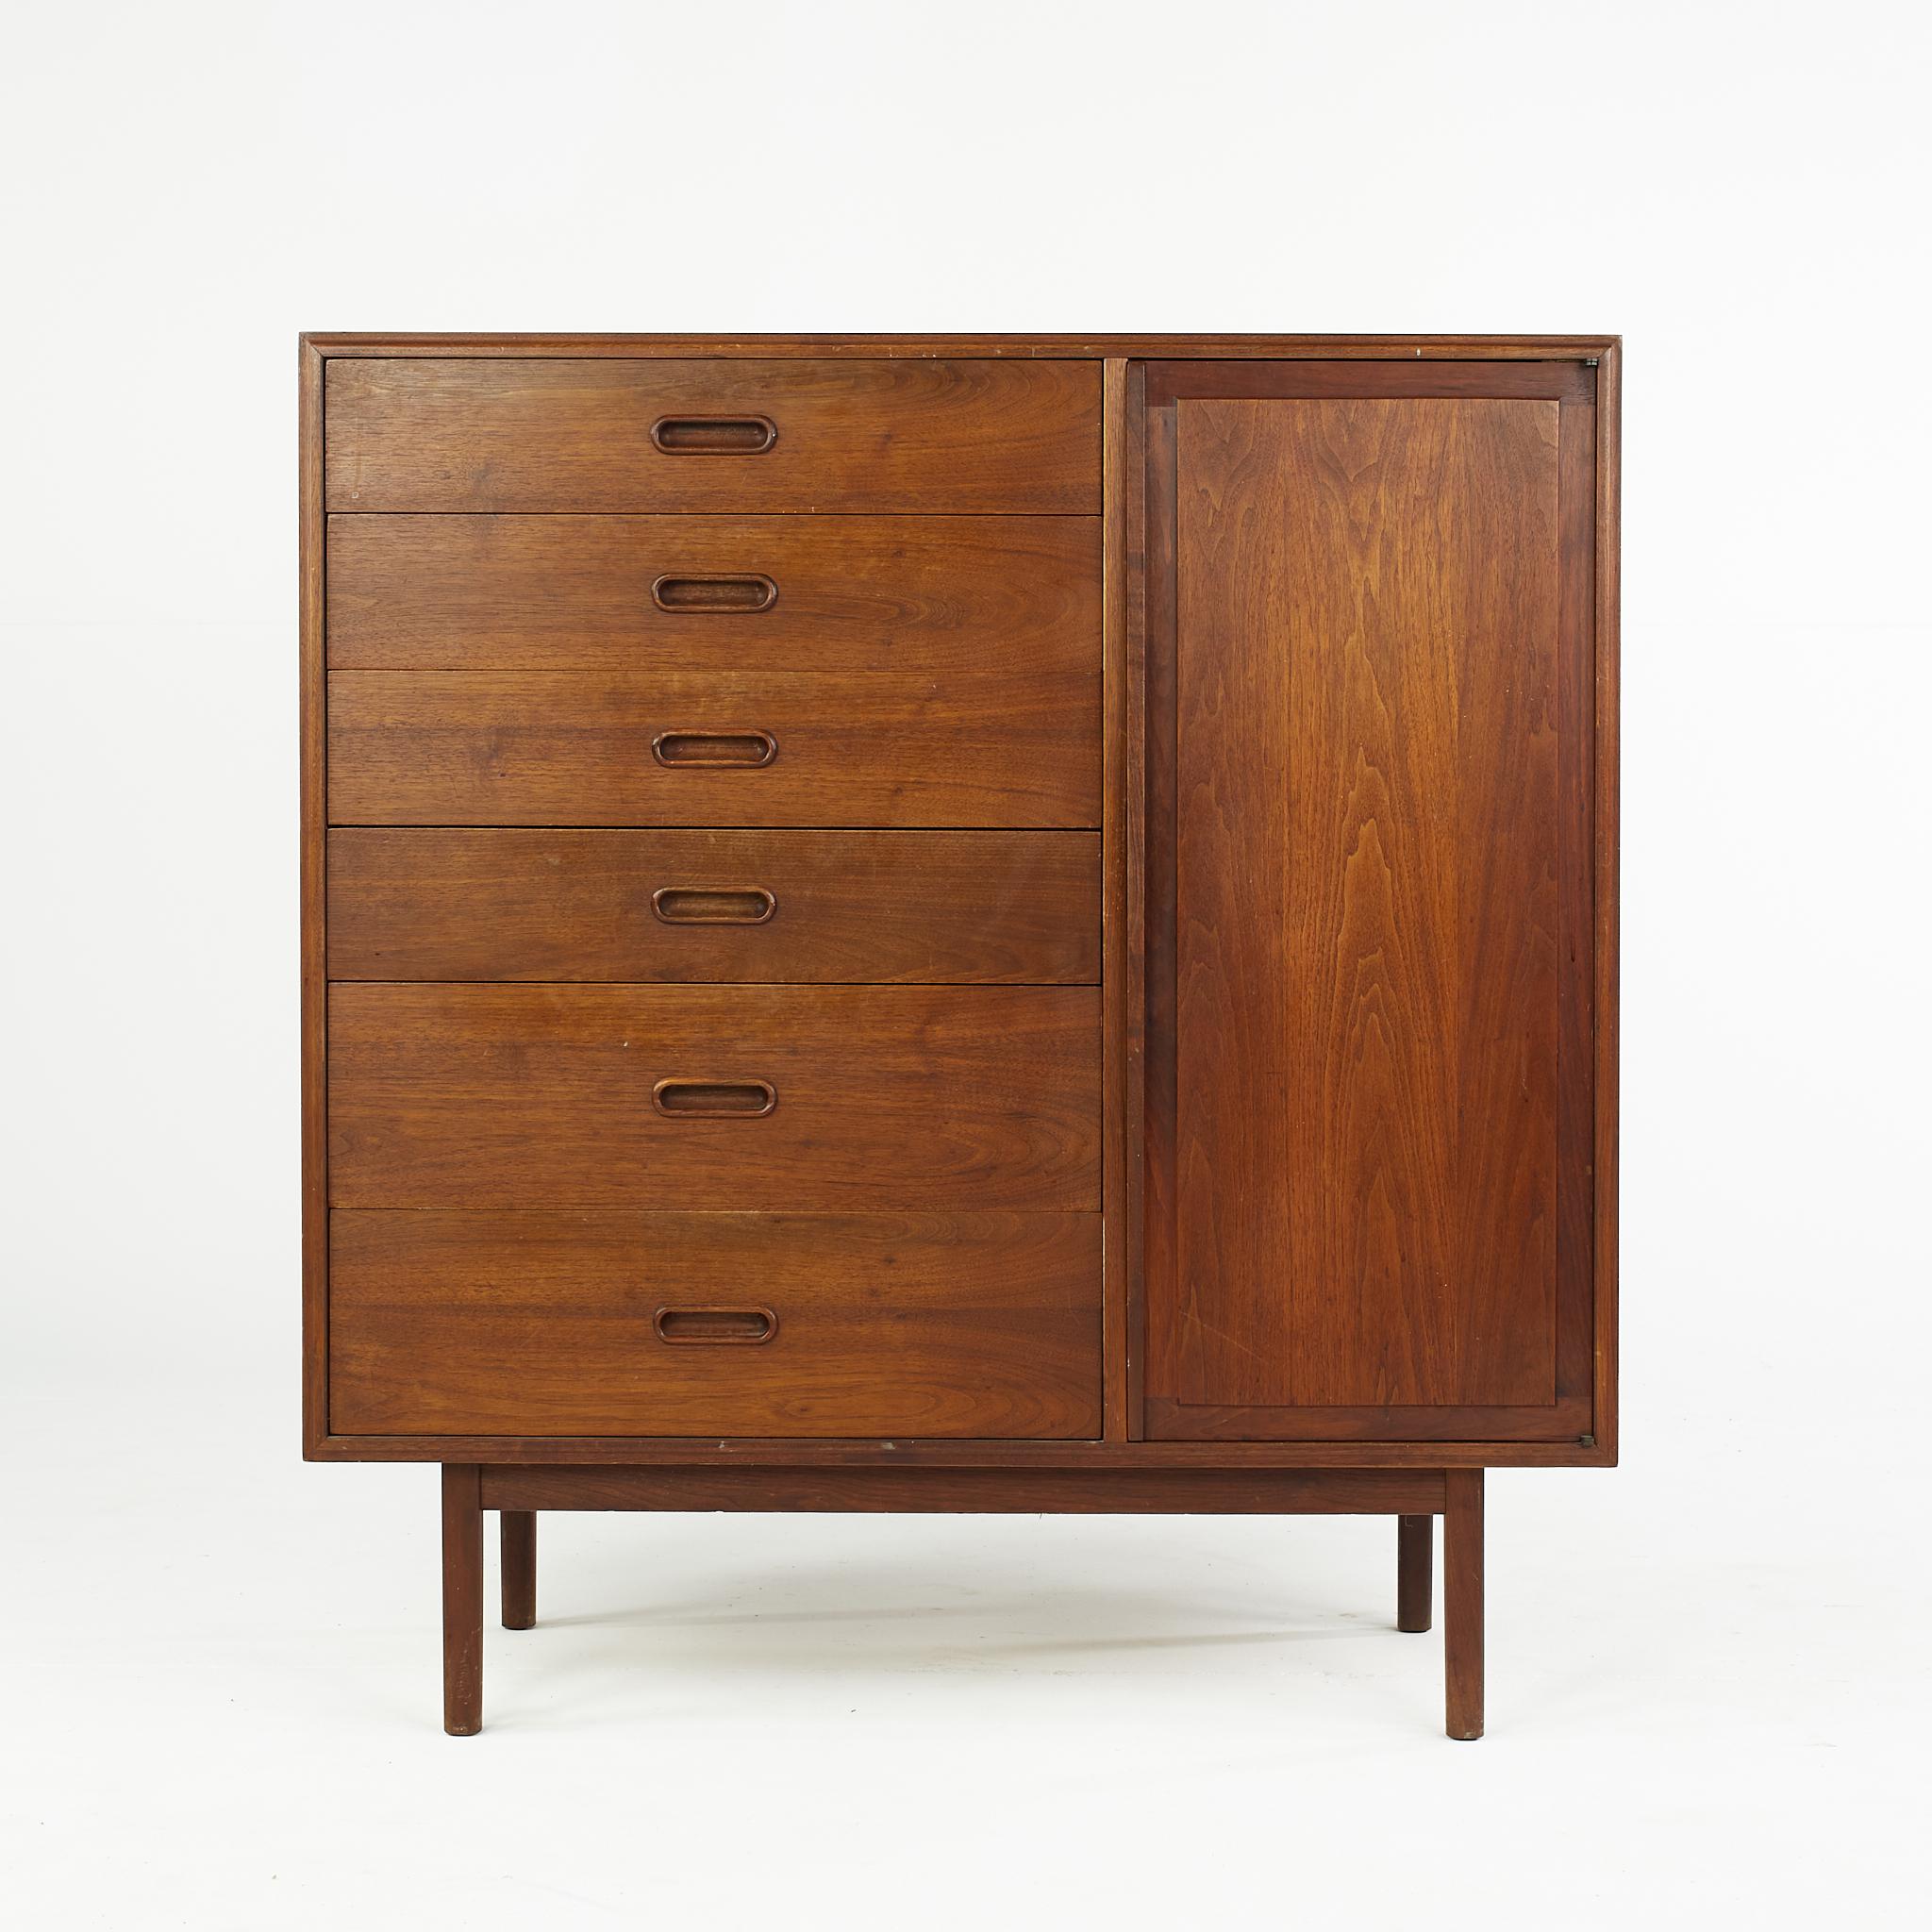 Jack Cartwright for Founders mid century gentlemans chest

This chest measures: 42 wide x 18 deep x 45 inches high

All pieces of furniture can be had in what we call restored vintage condition. That means the piece is restored upon purchase so